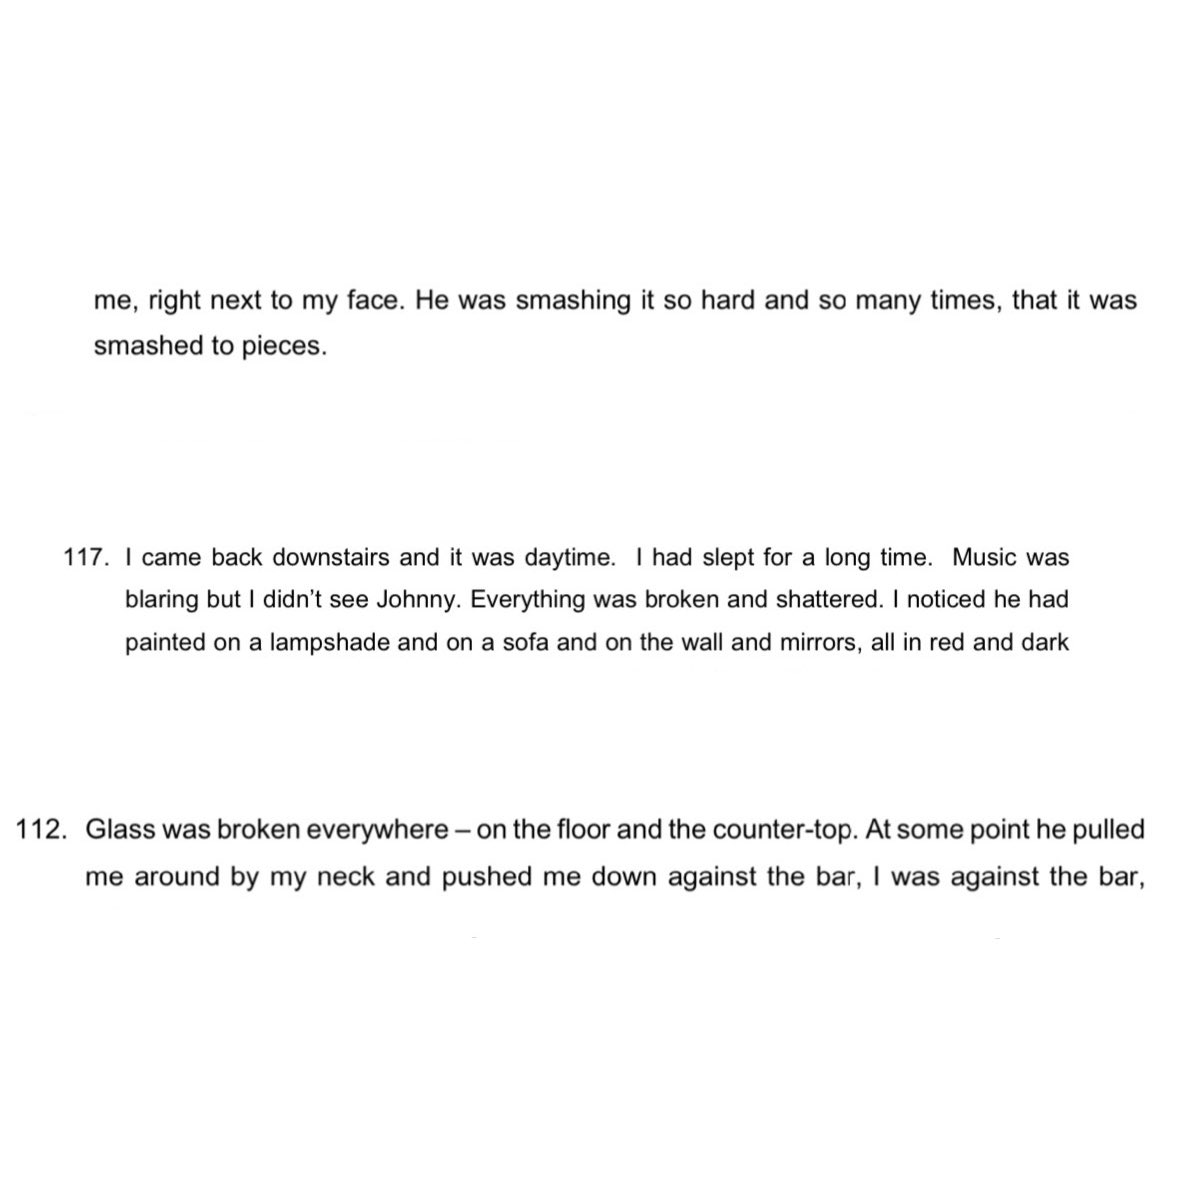 Smashing Items and wrecking apartments. - Taken from Amber’s first witness statement for the UK trial, the Australia incident.